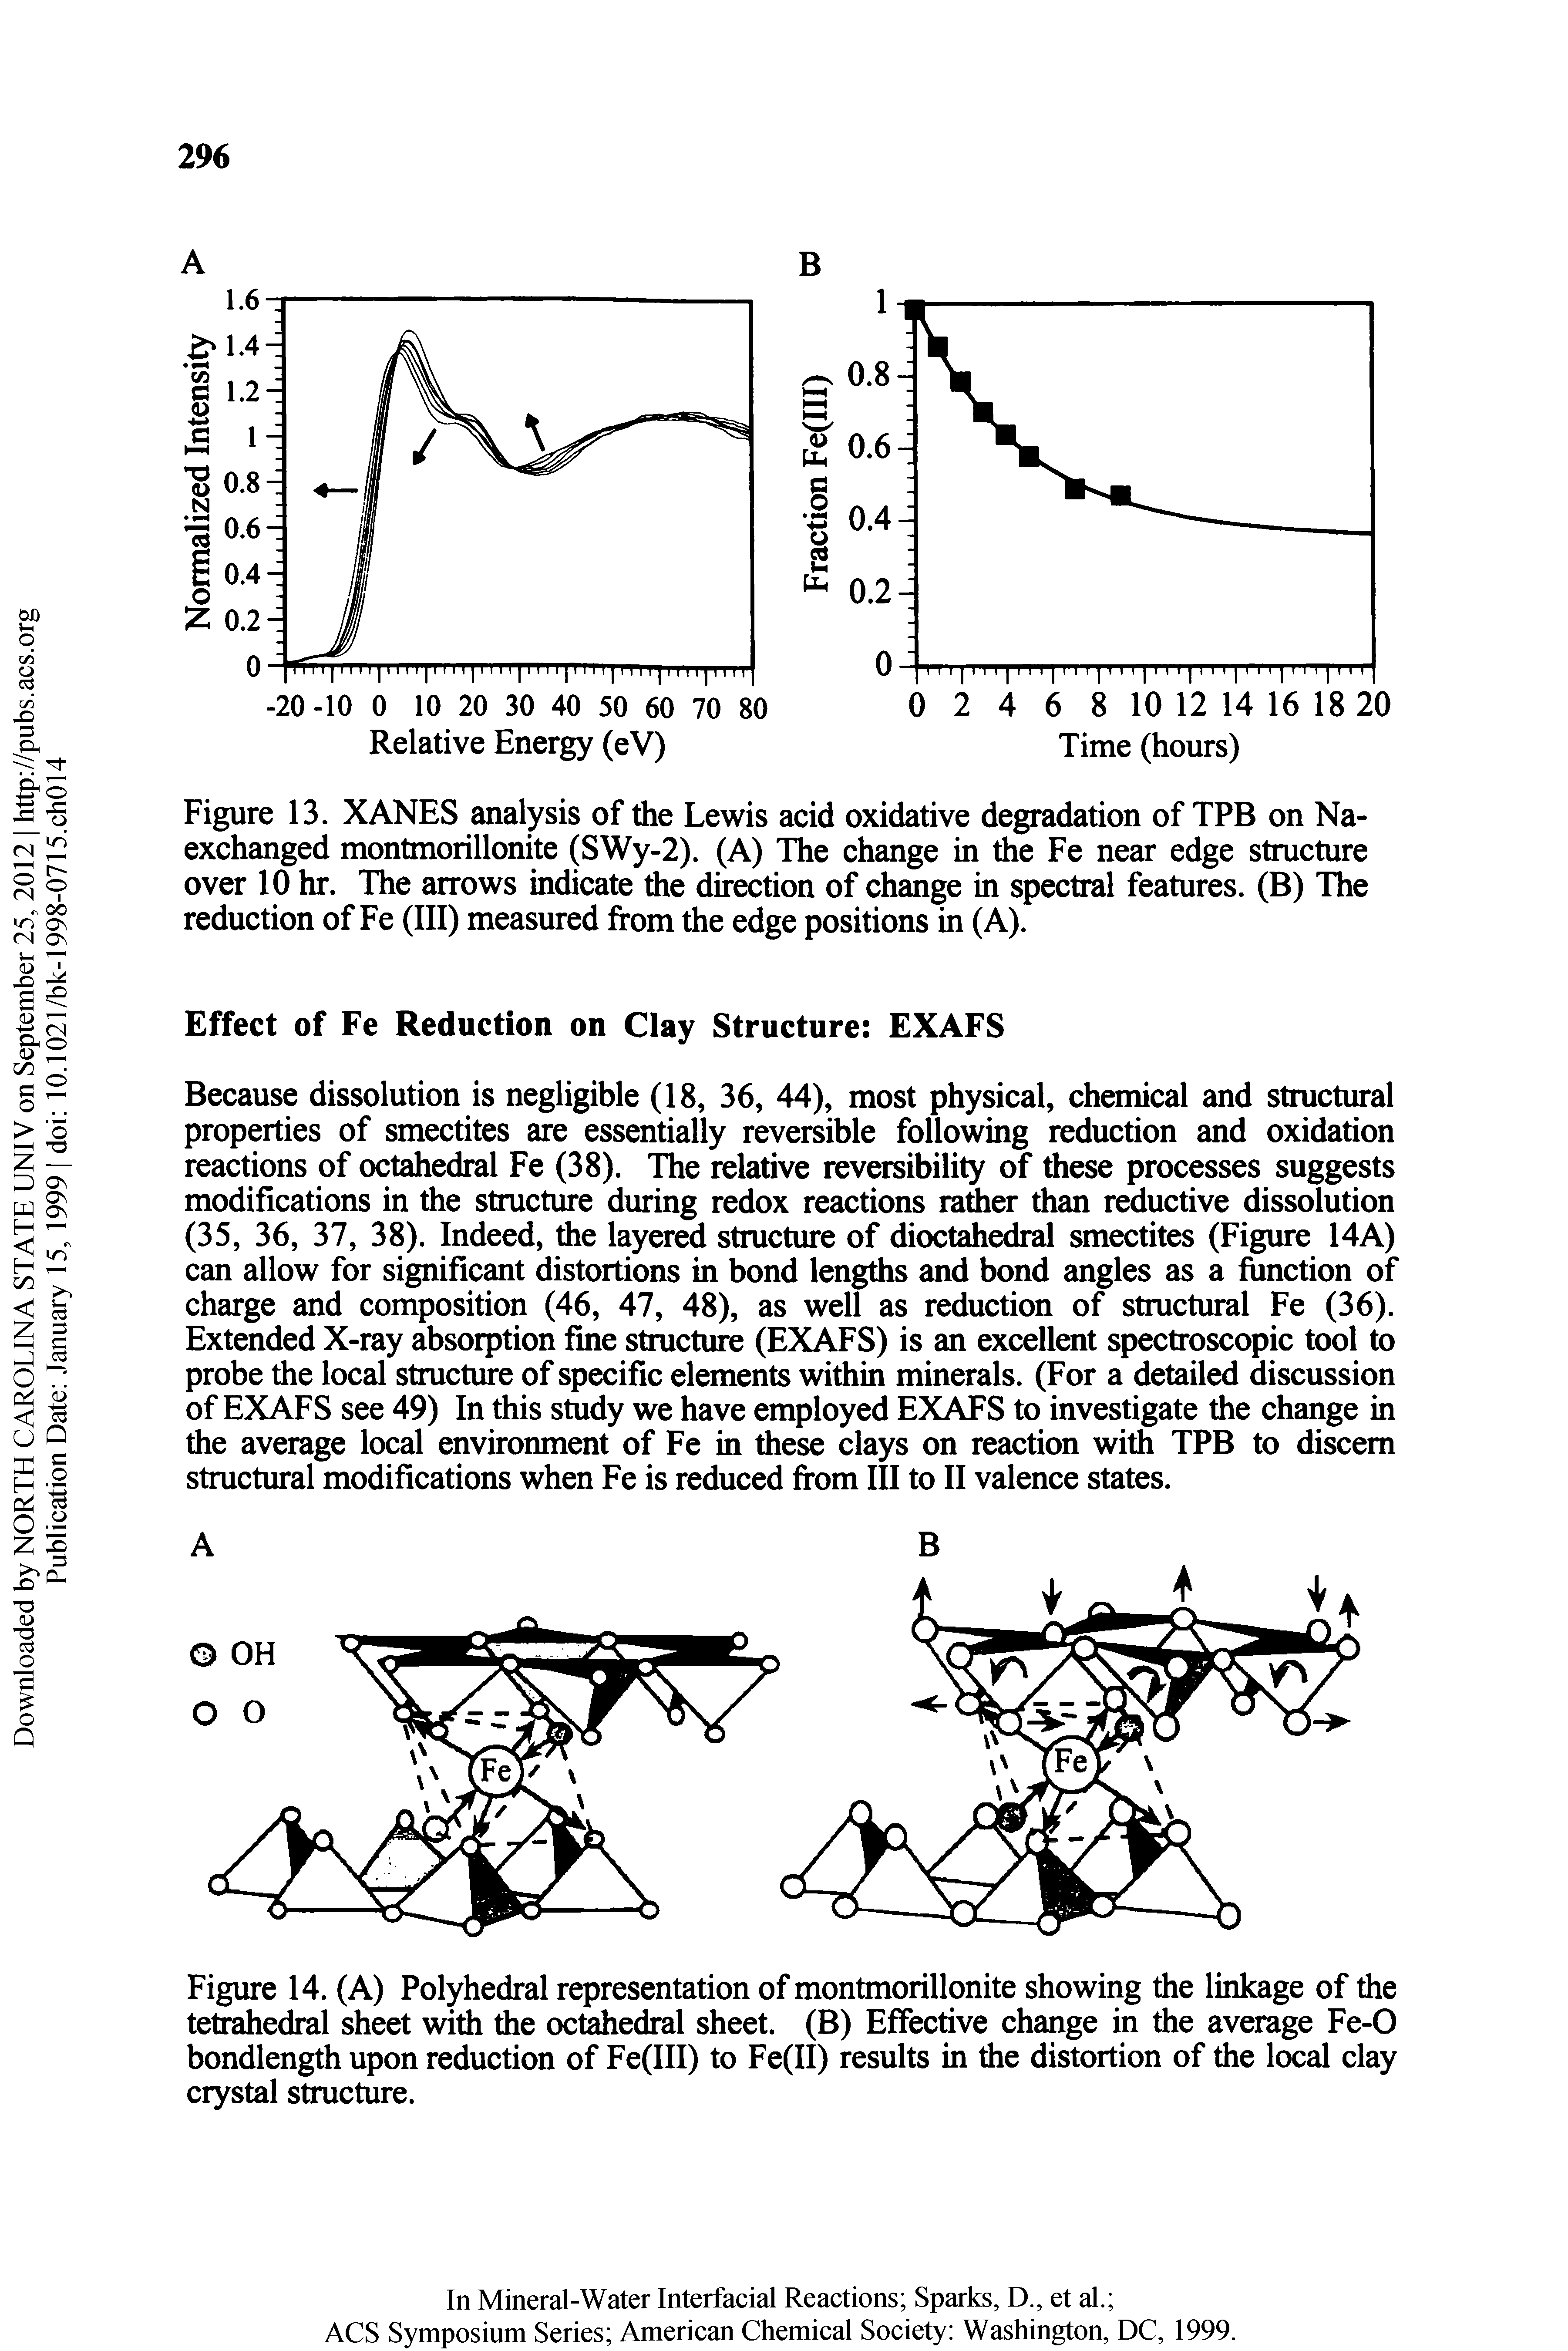 Figure 13. XANES analysis of the Lewis acid oxidative degradation of TPB on Na-exchanged montmorillonite (SWy-2). (A) The change in the Fe near edge structure over 10 hr. The arrows indicate the direction of change in spectral features. (B) The reduction of Fe (III) measured from the edge positions in (A).